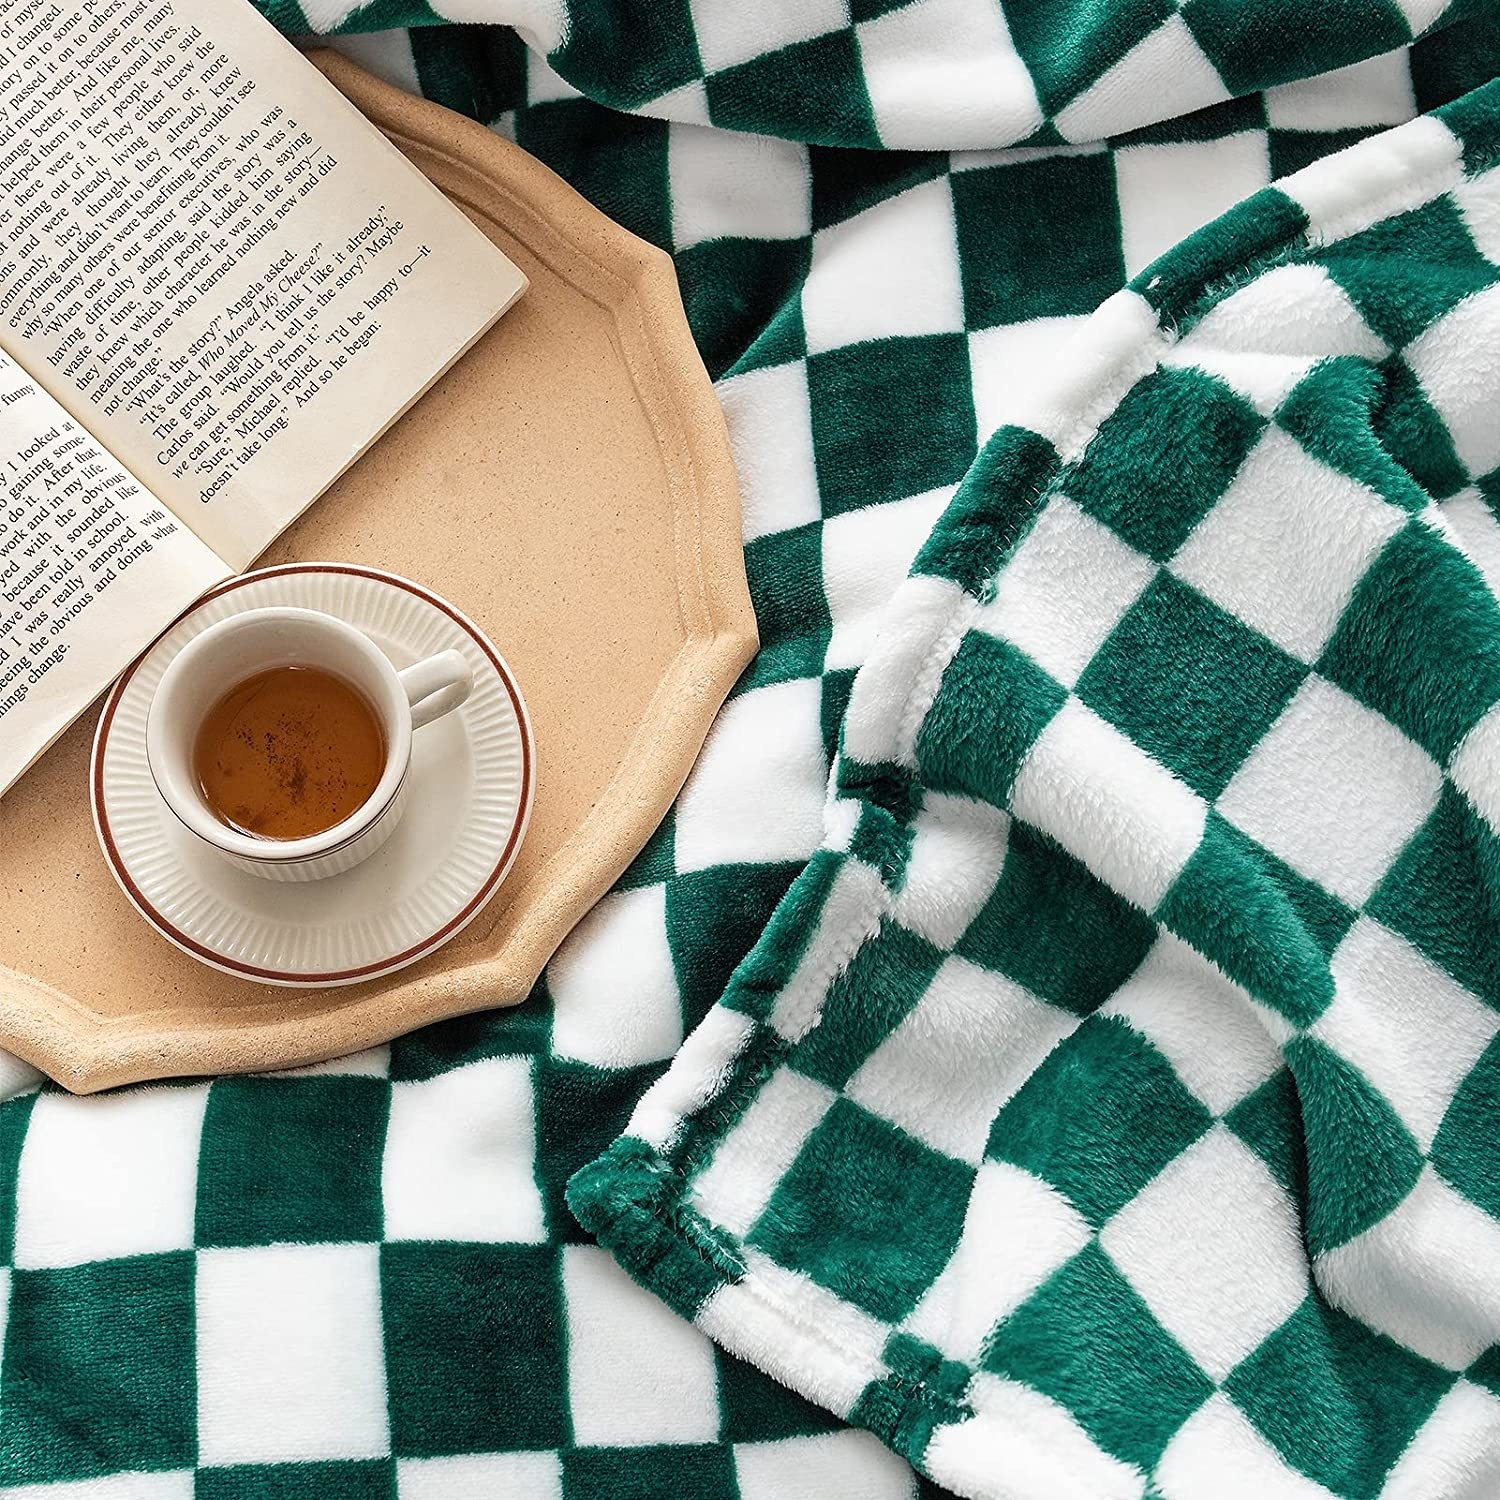 The blanket on a bed with a tray, a teacup, and a book on it